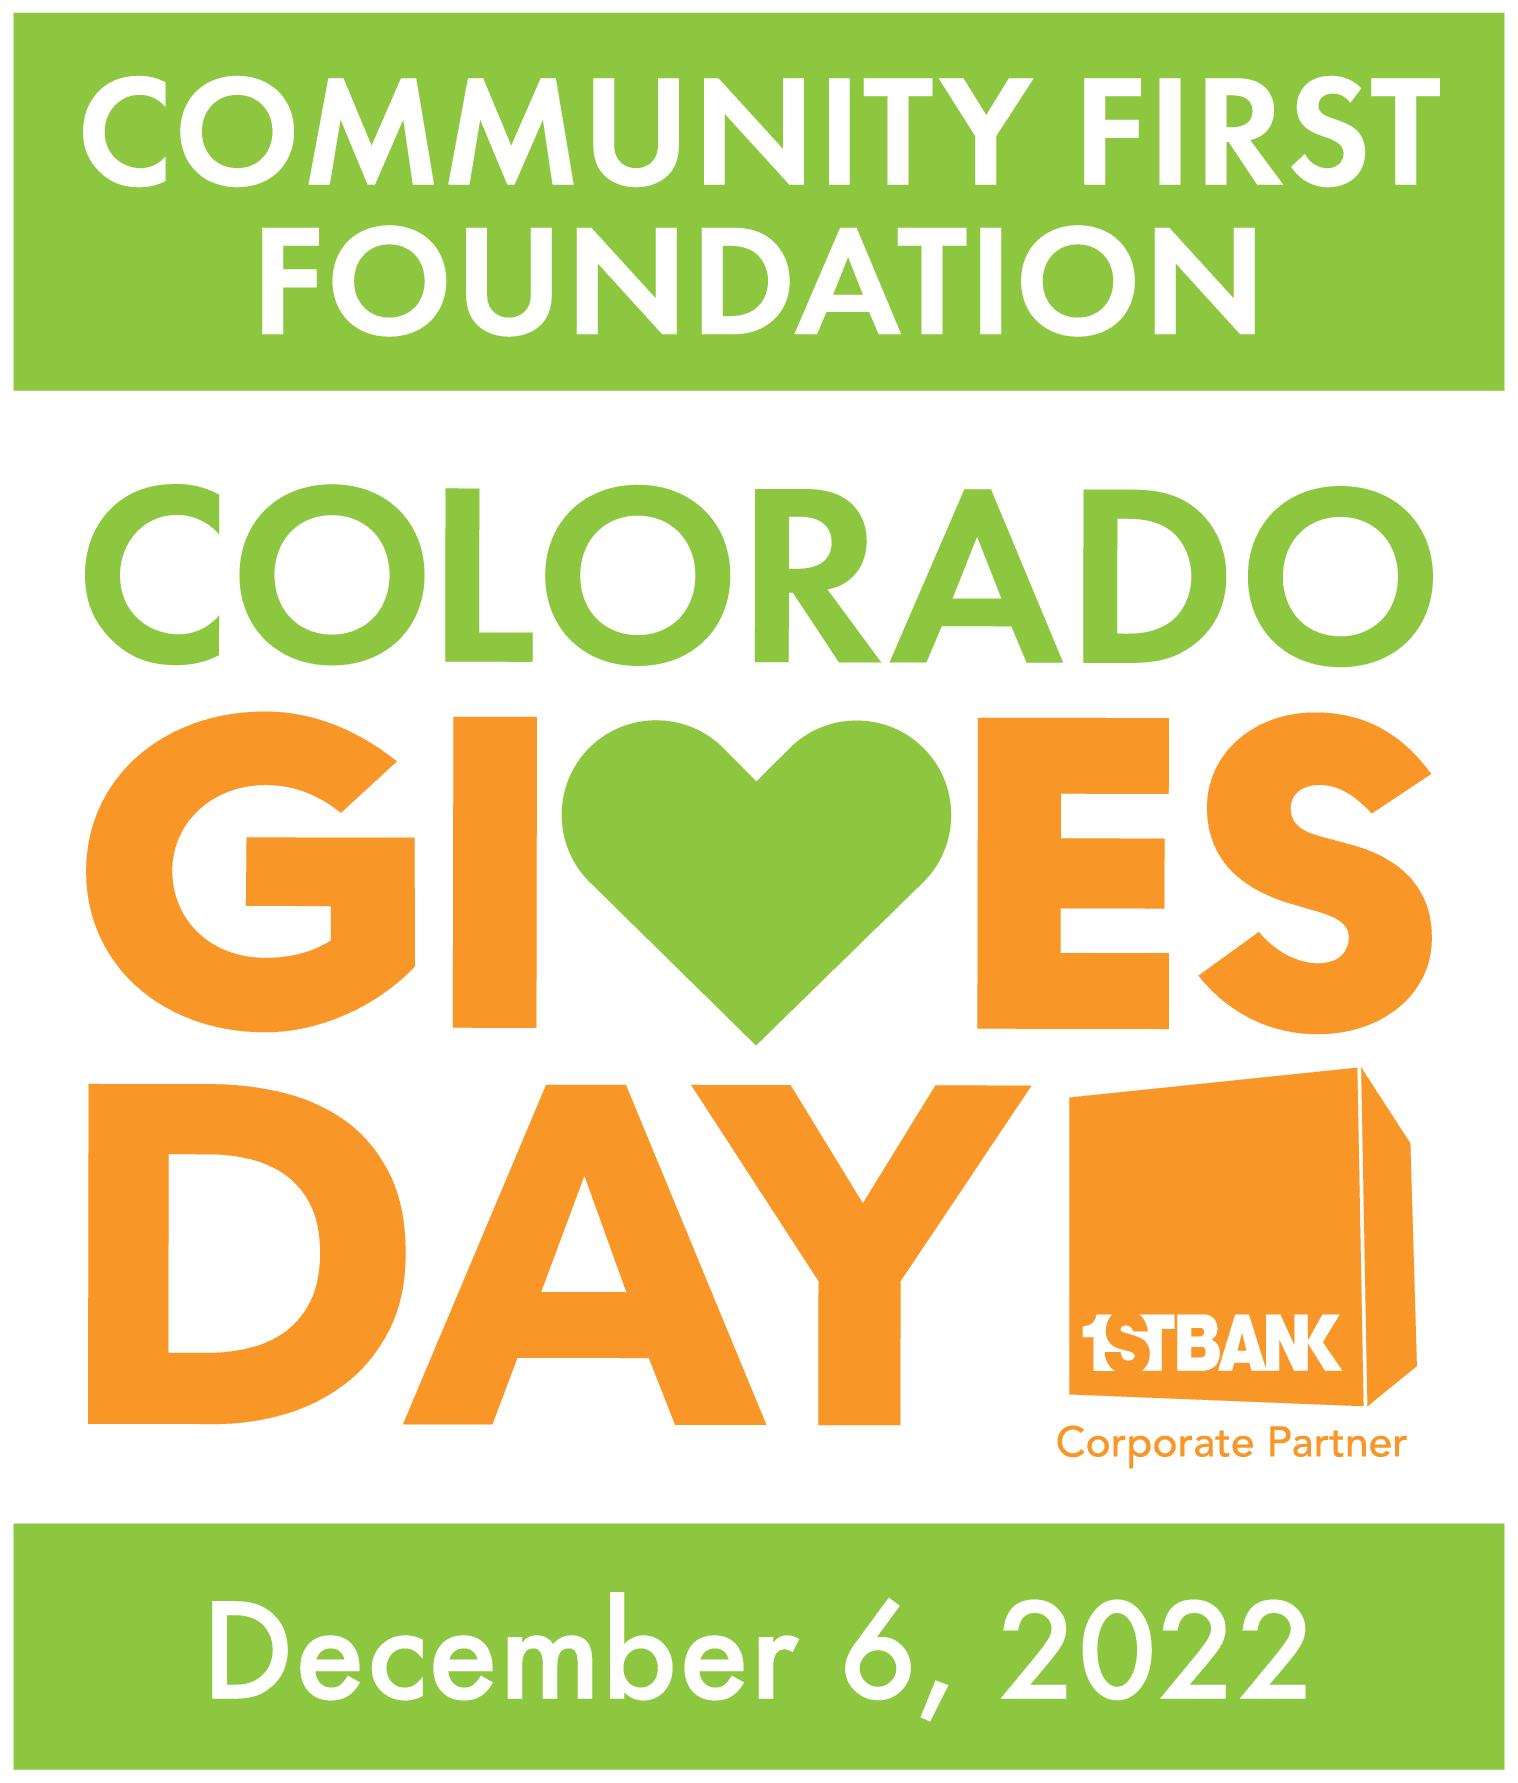 Colorado Gives Day is December 6th